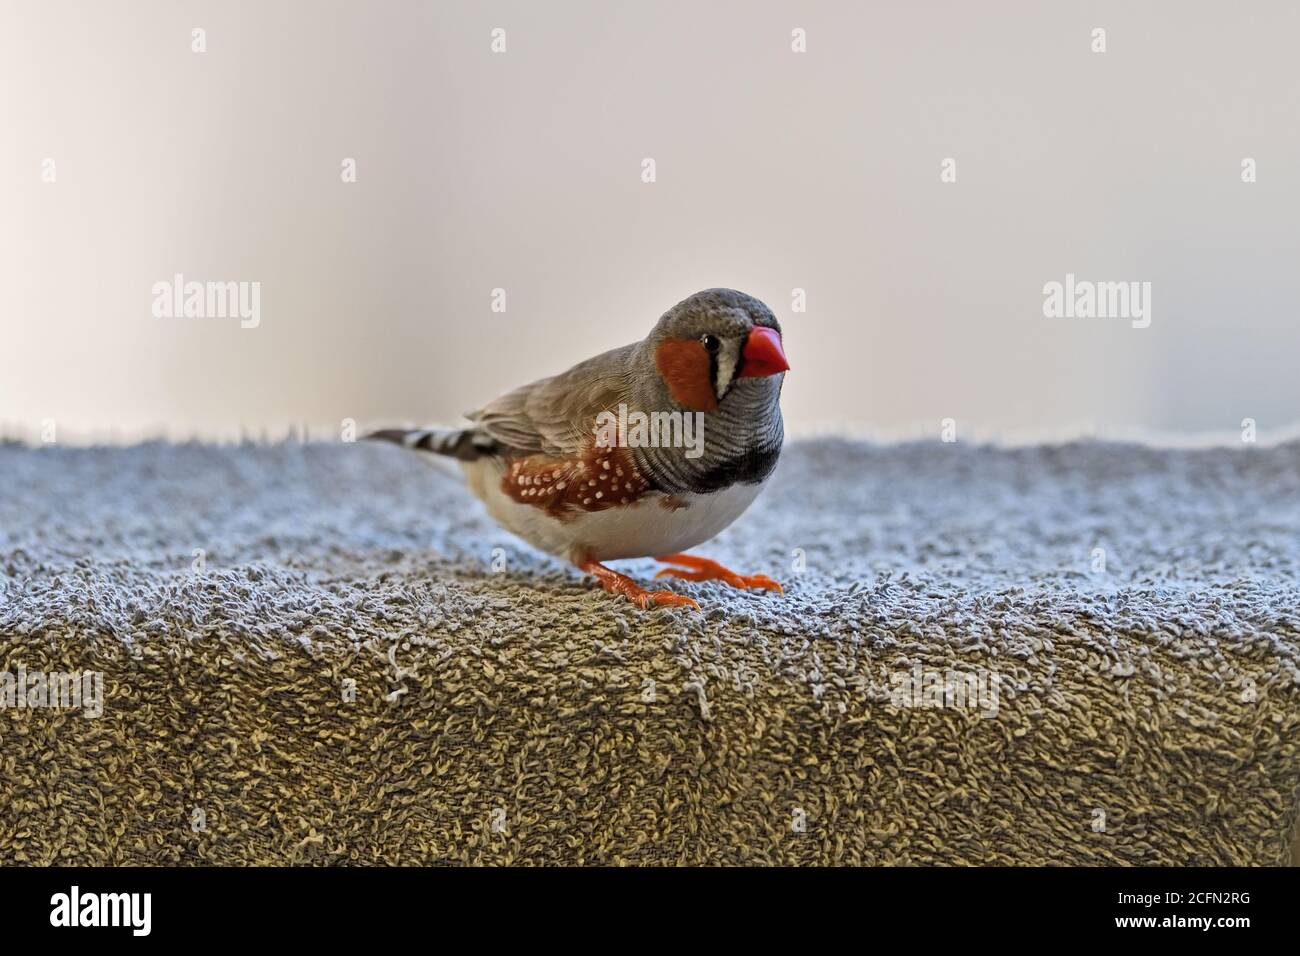 Zebra Finch photographed in the Wild Stock Photo